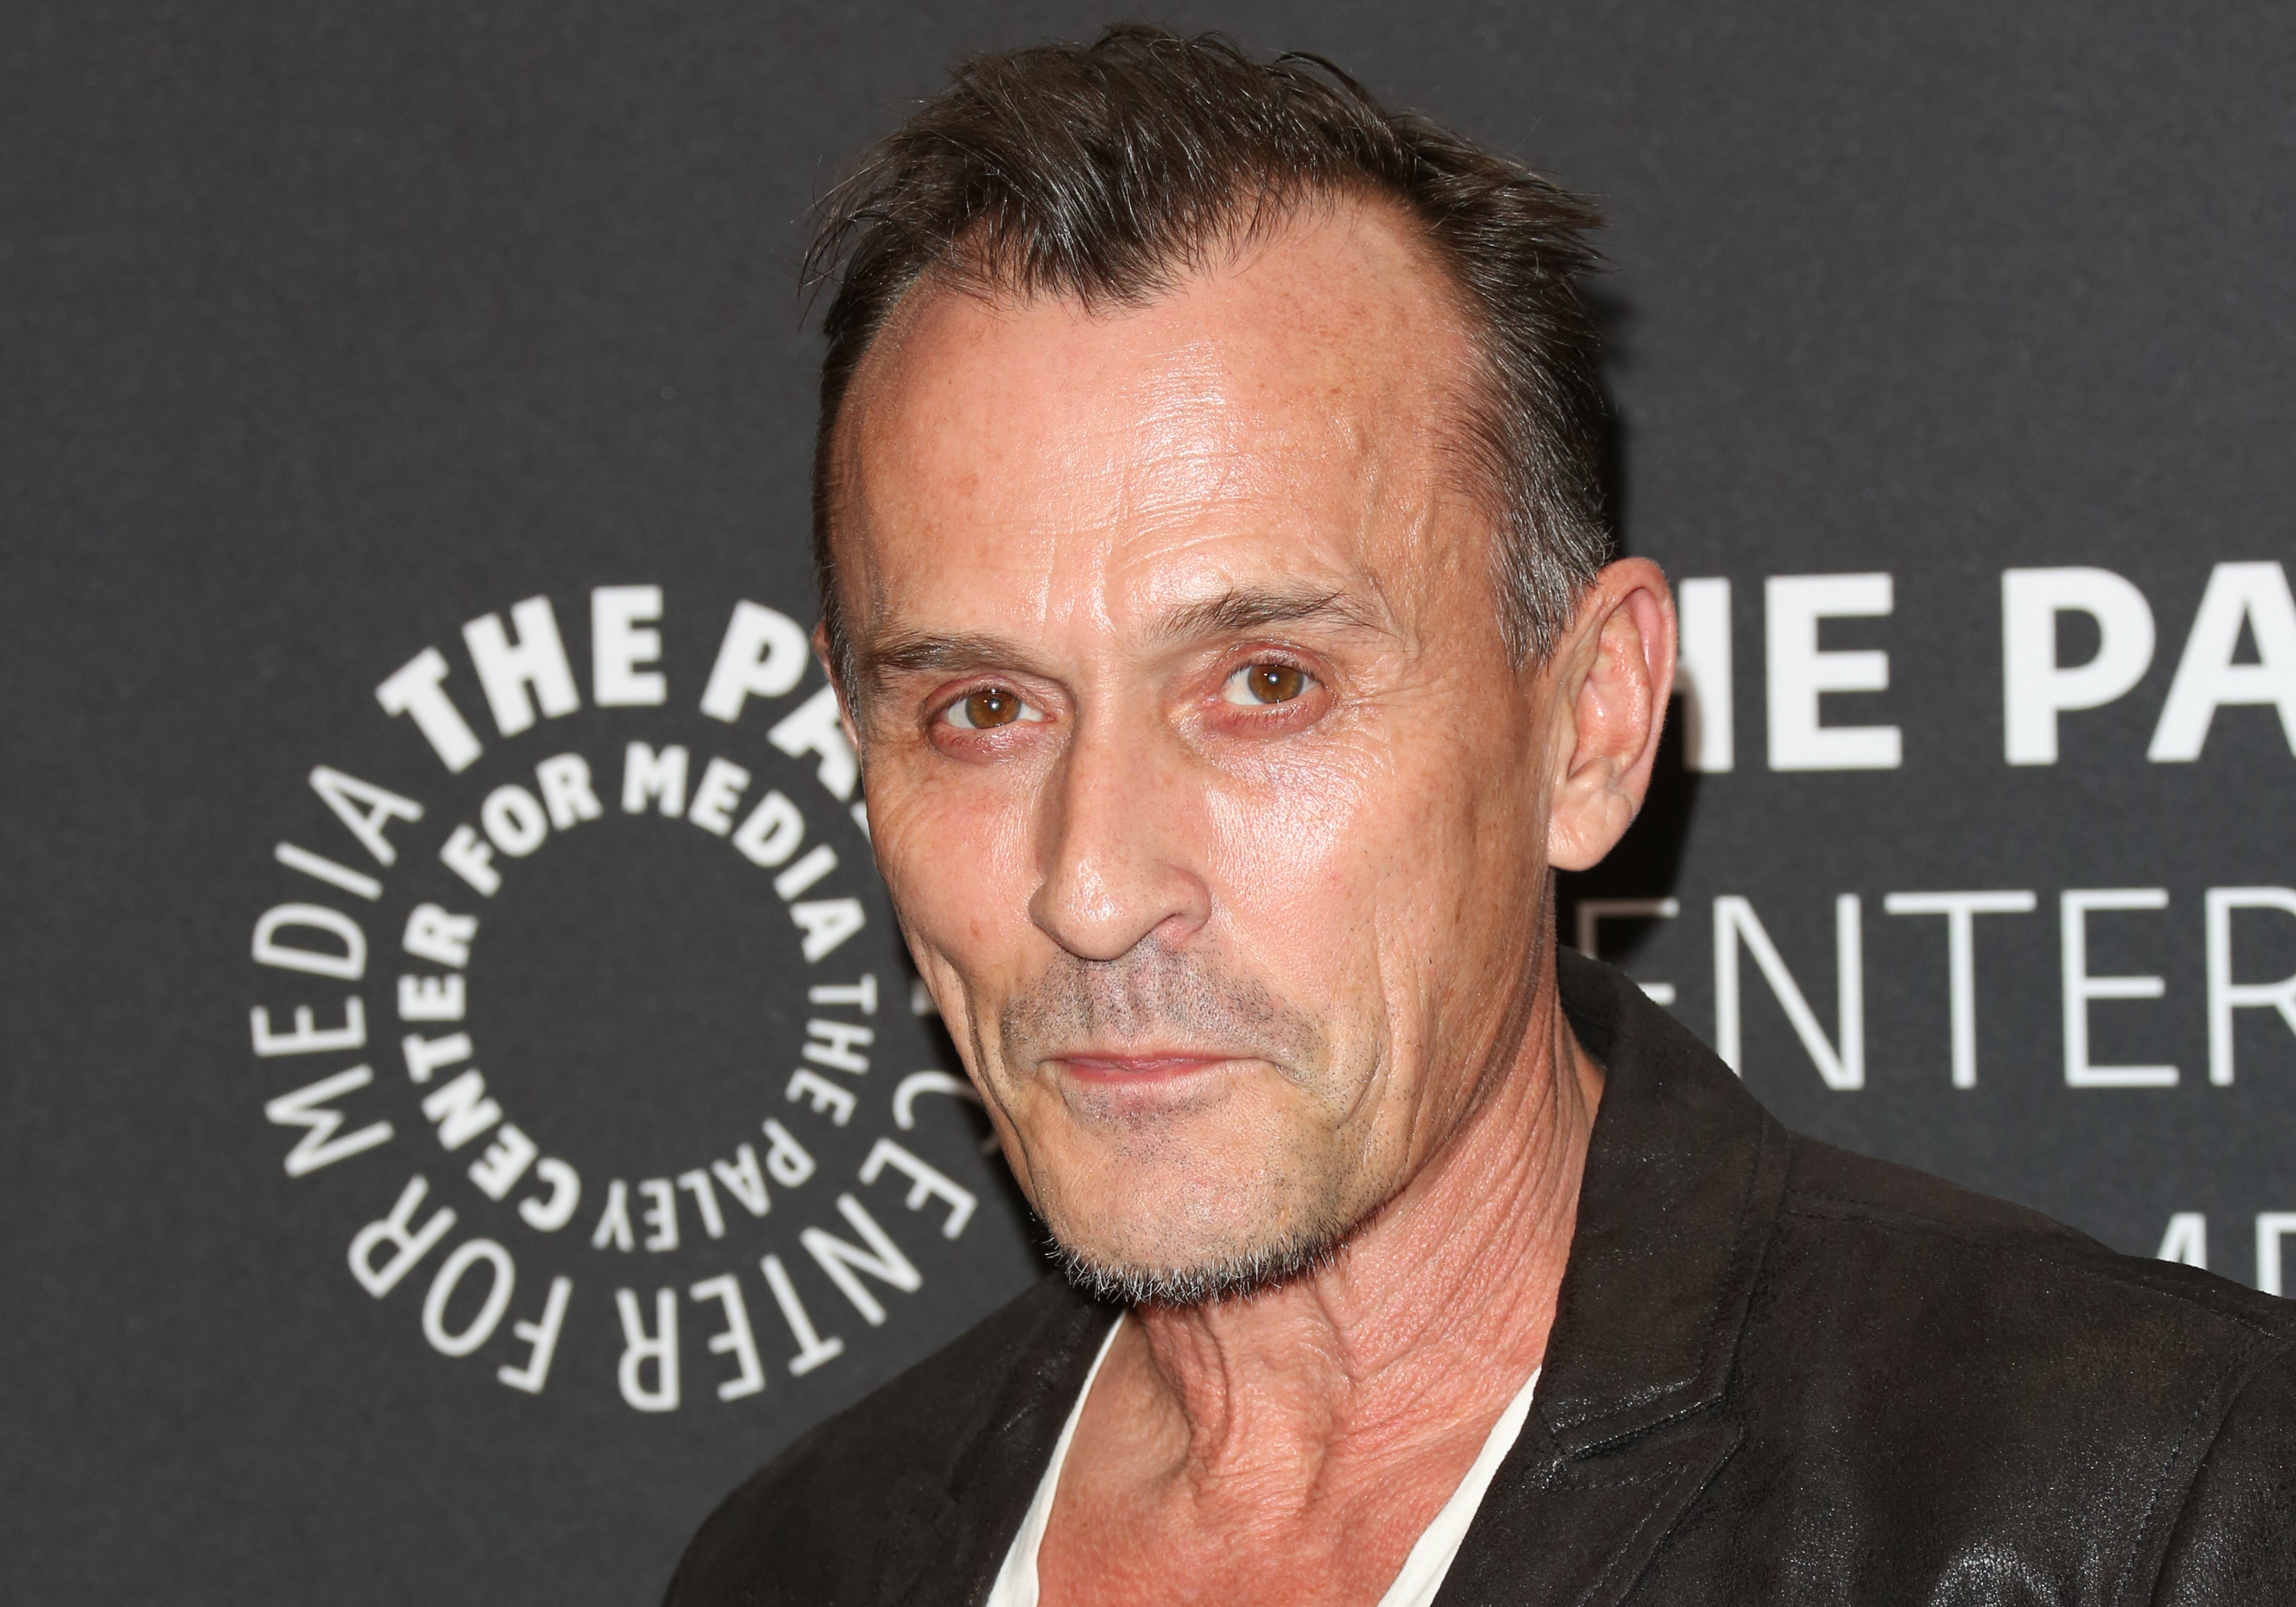 Actor Robert Knepper attends the "Prison Break" screening and conversation at The Paley Center for Media on March 29, 2017. (Paul Archuleta—FilmMagic)